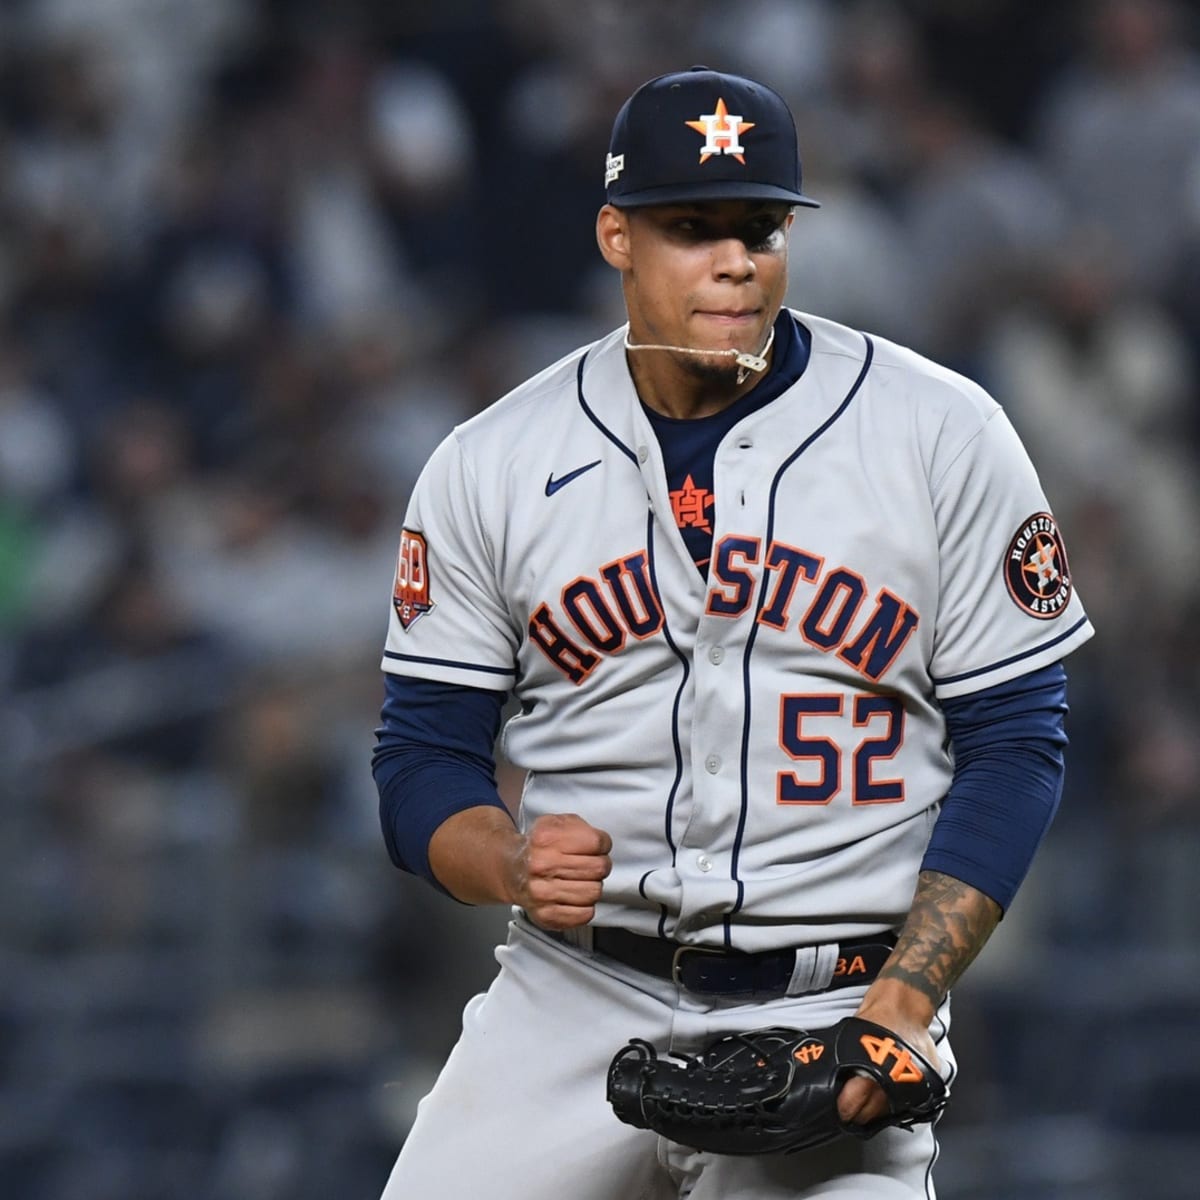 Yankees-Astros ALCS Game 1 starting lineups and pitching matchup